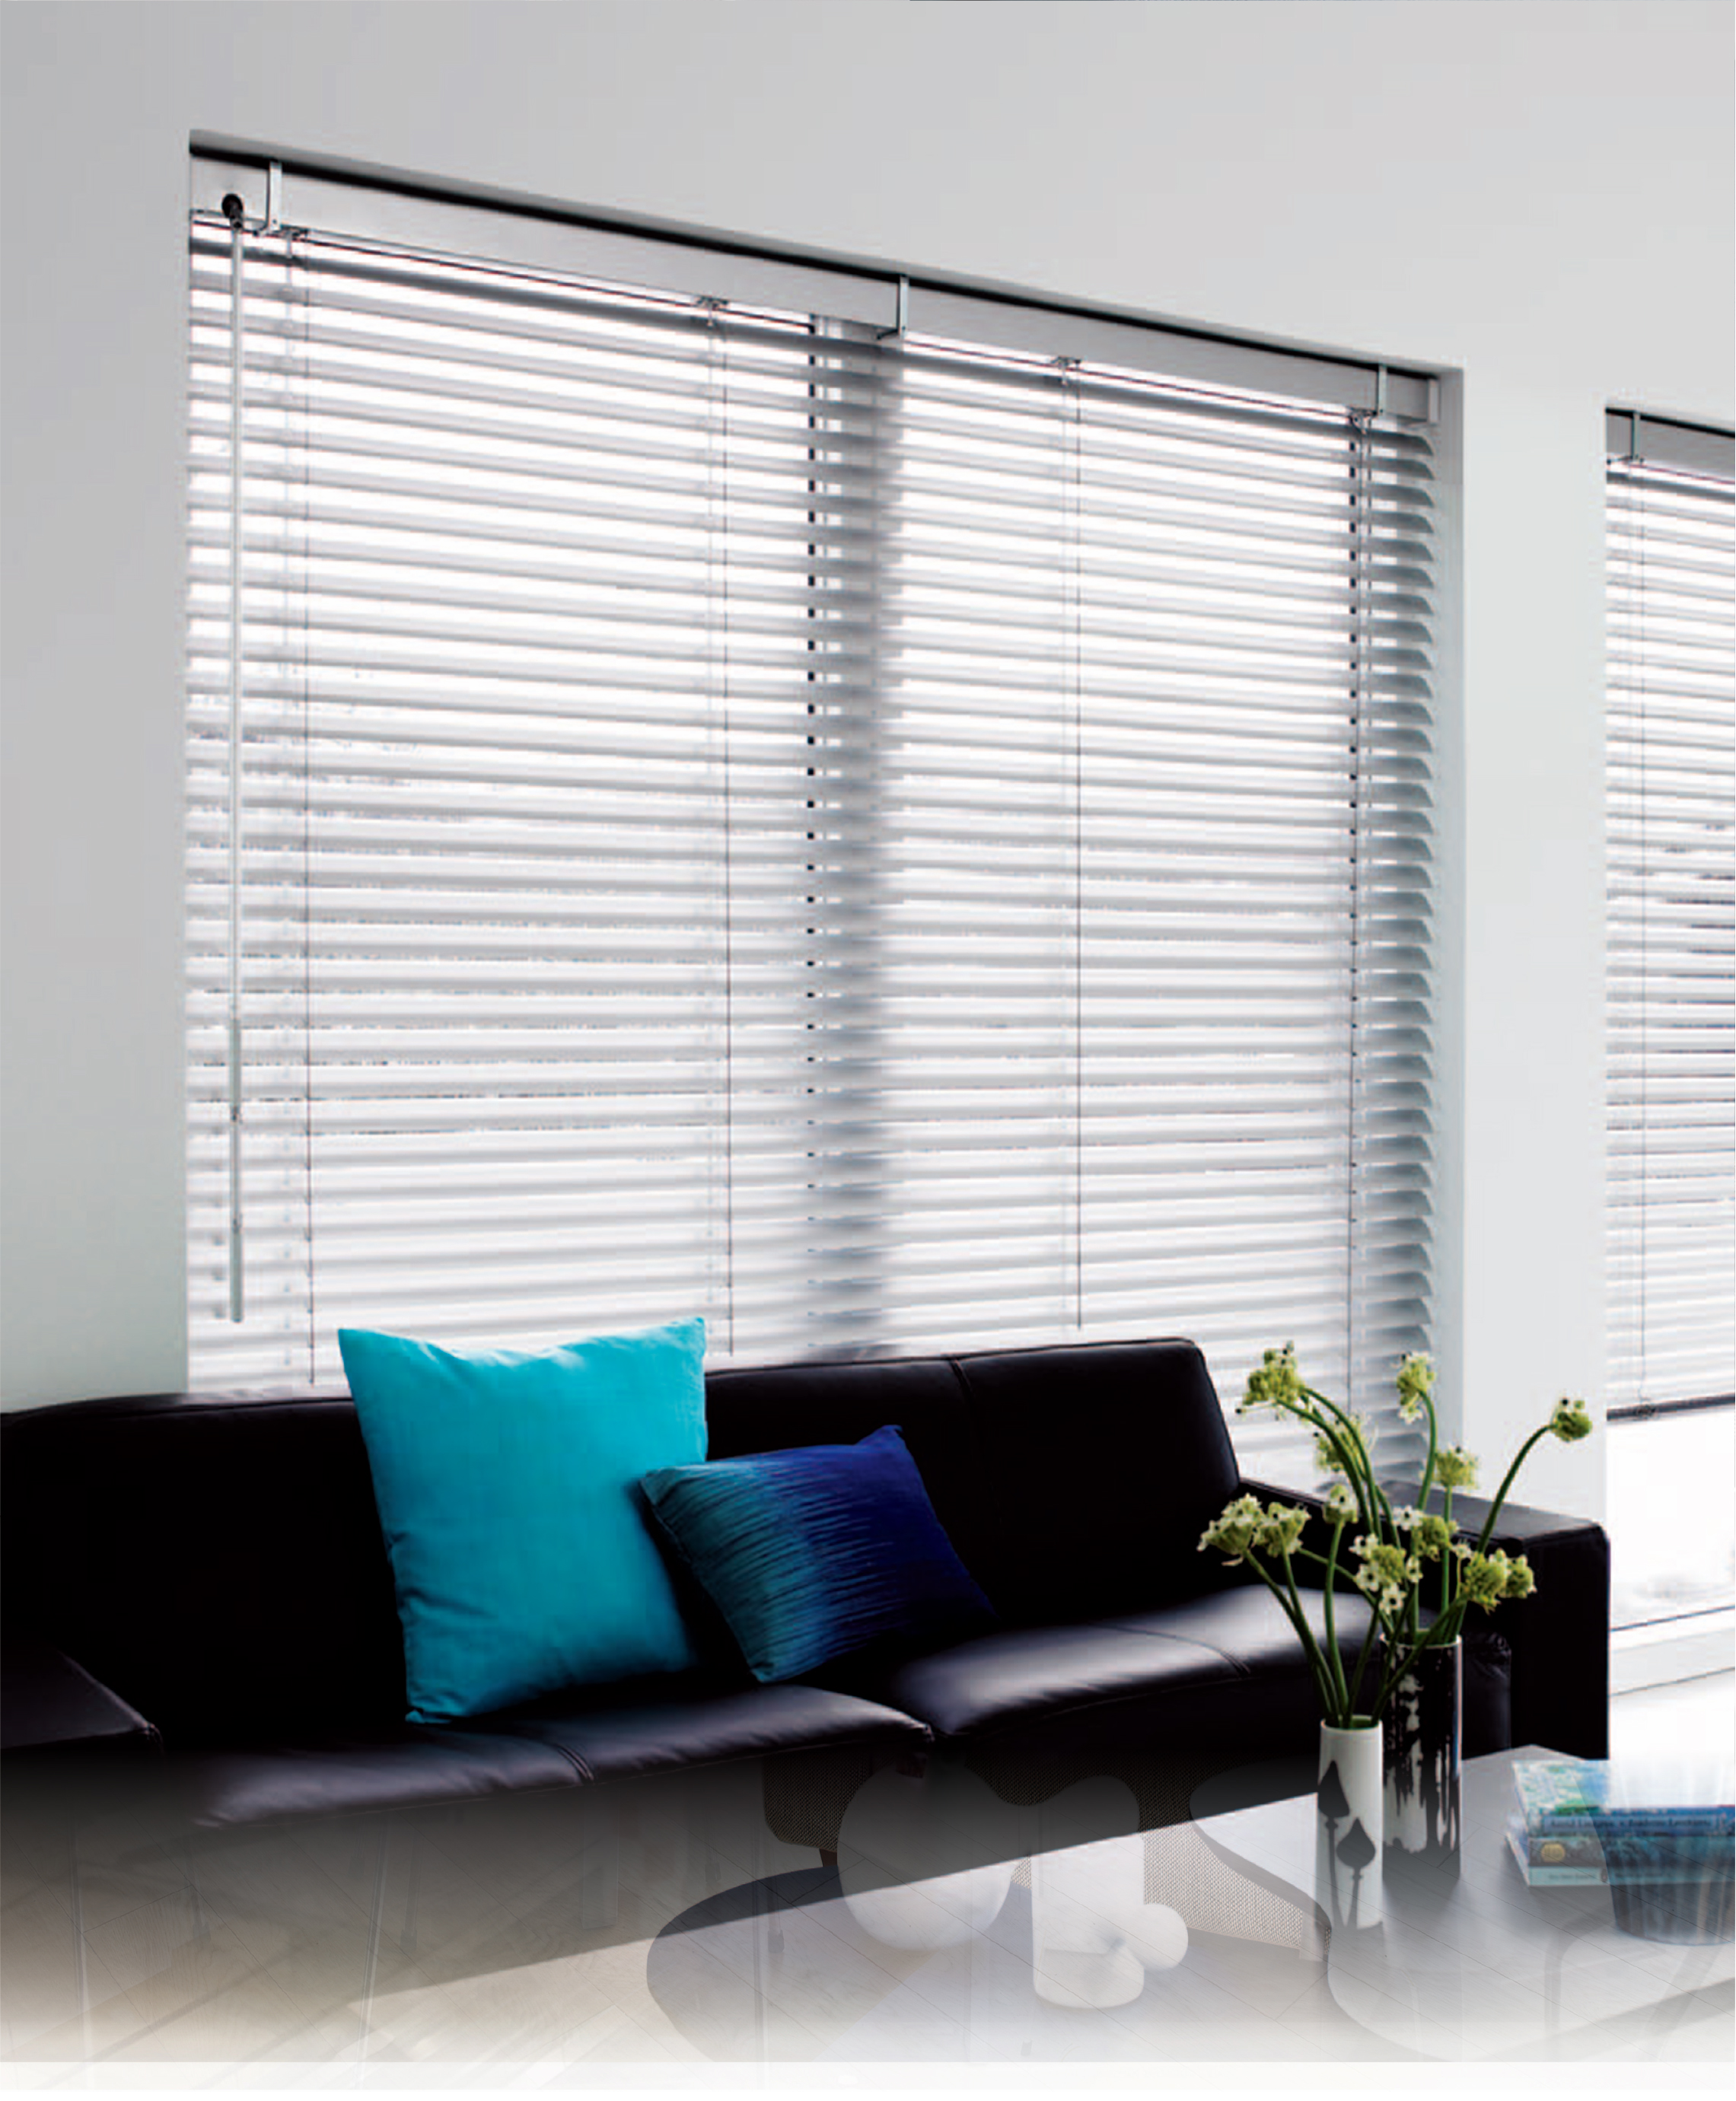 What are the prime benefits of using wooden shutter windows?